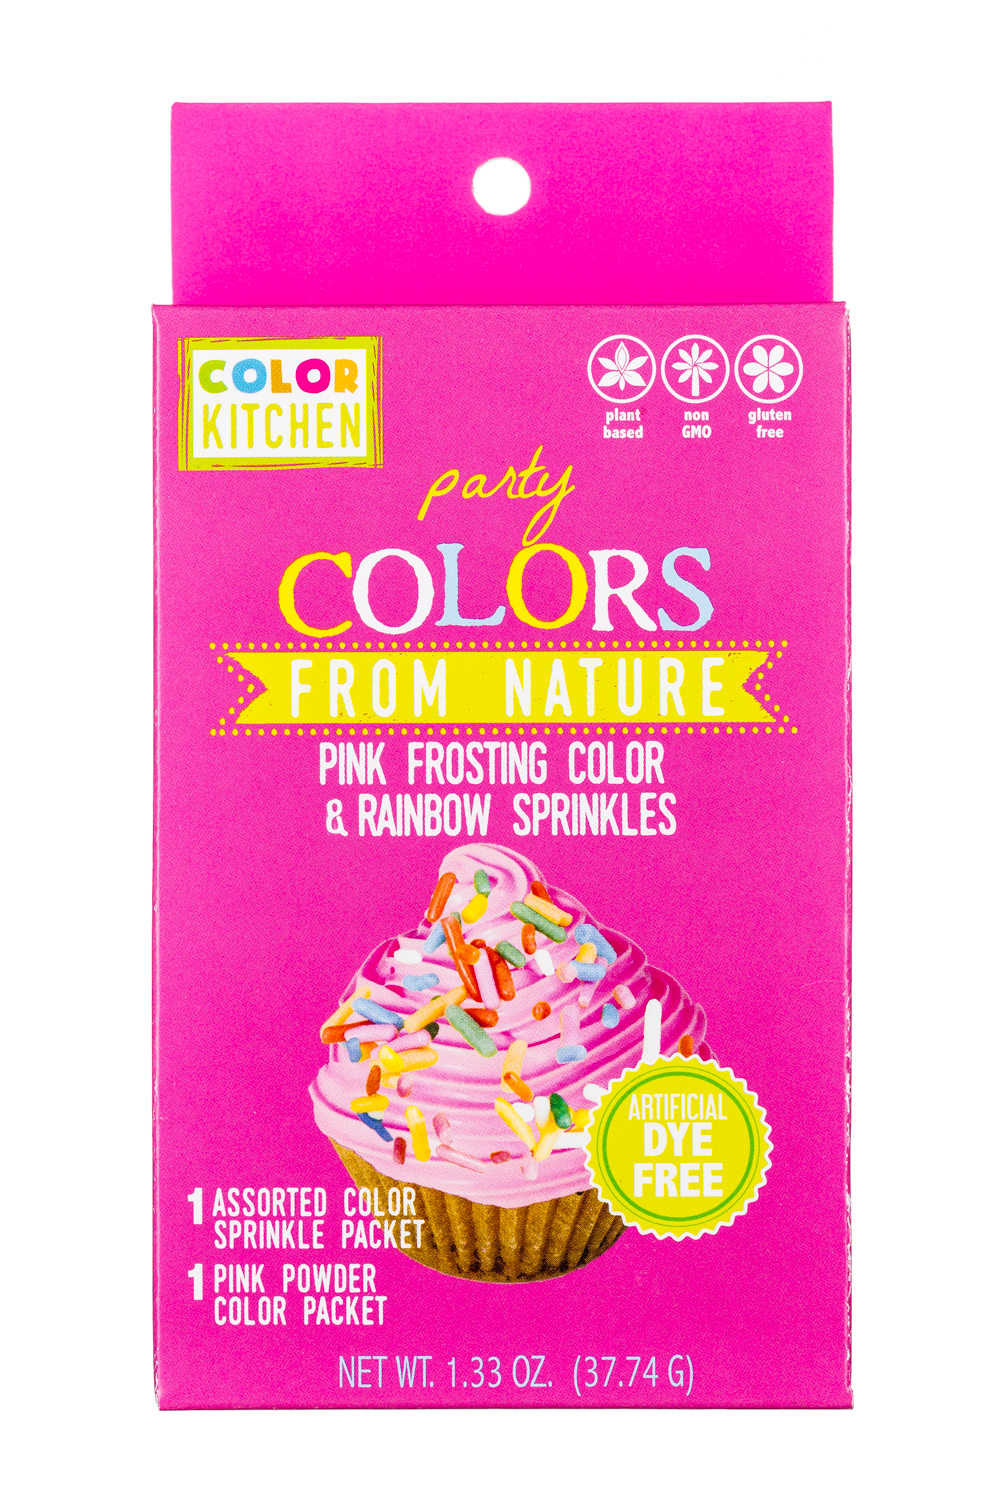 Naturally Sourced Food & Frosting Color, Plant-based, Artificial Dye-free, Vegan, Non-GMO